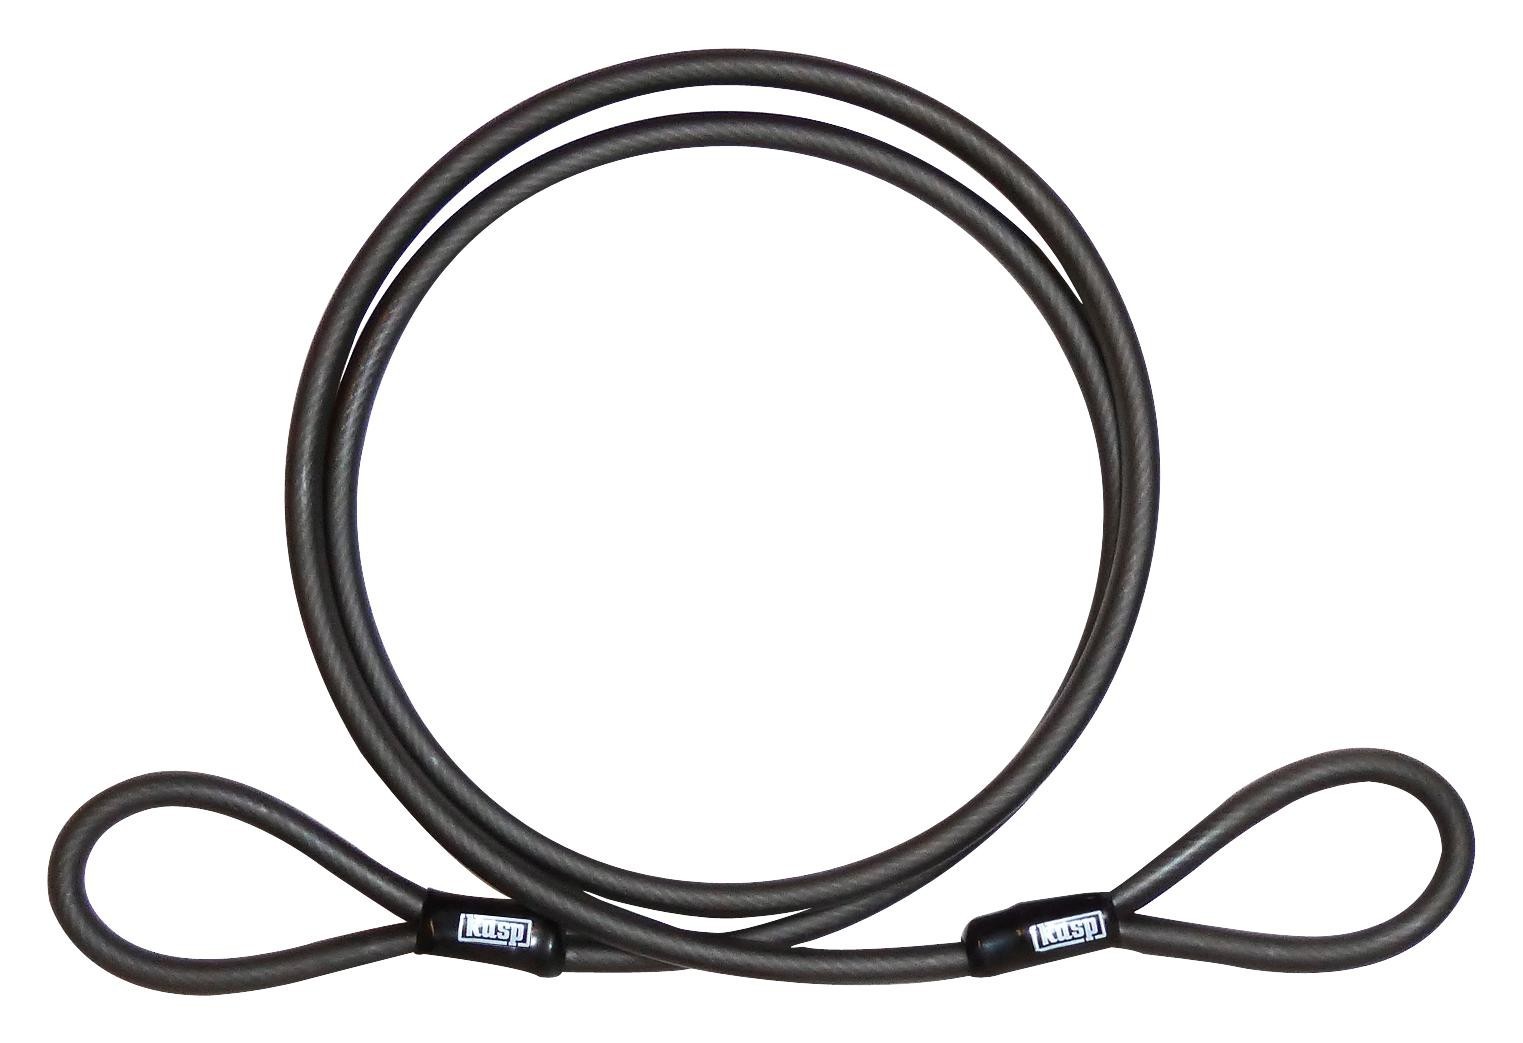 Kasp Security K4551220D Double Loop Security Cable, 12 X 2000mm